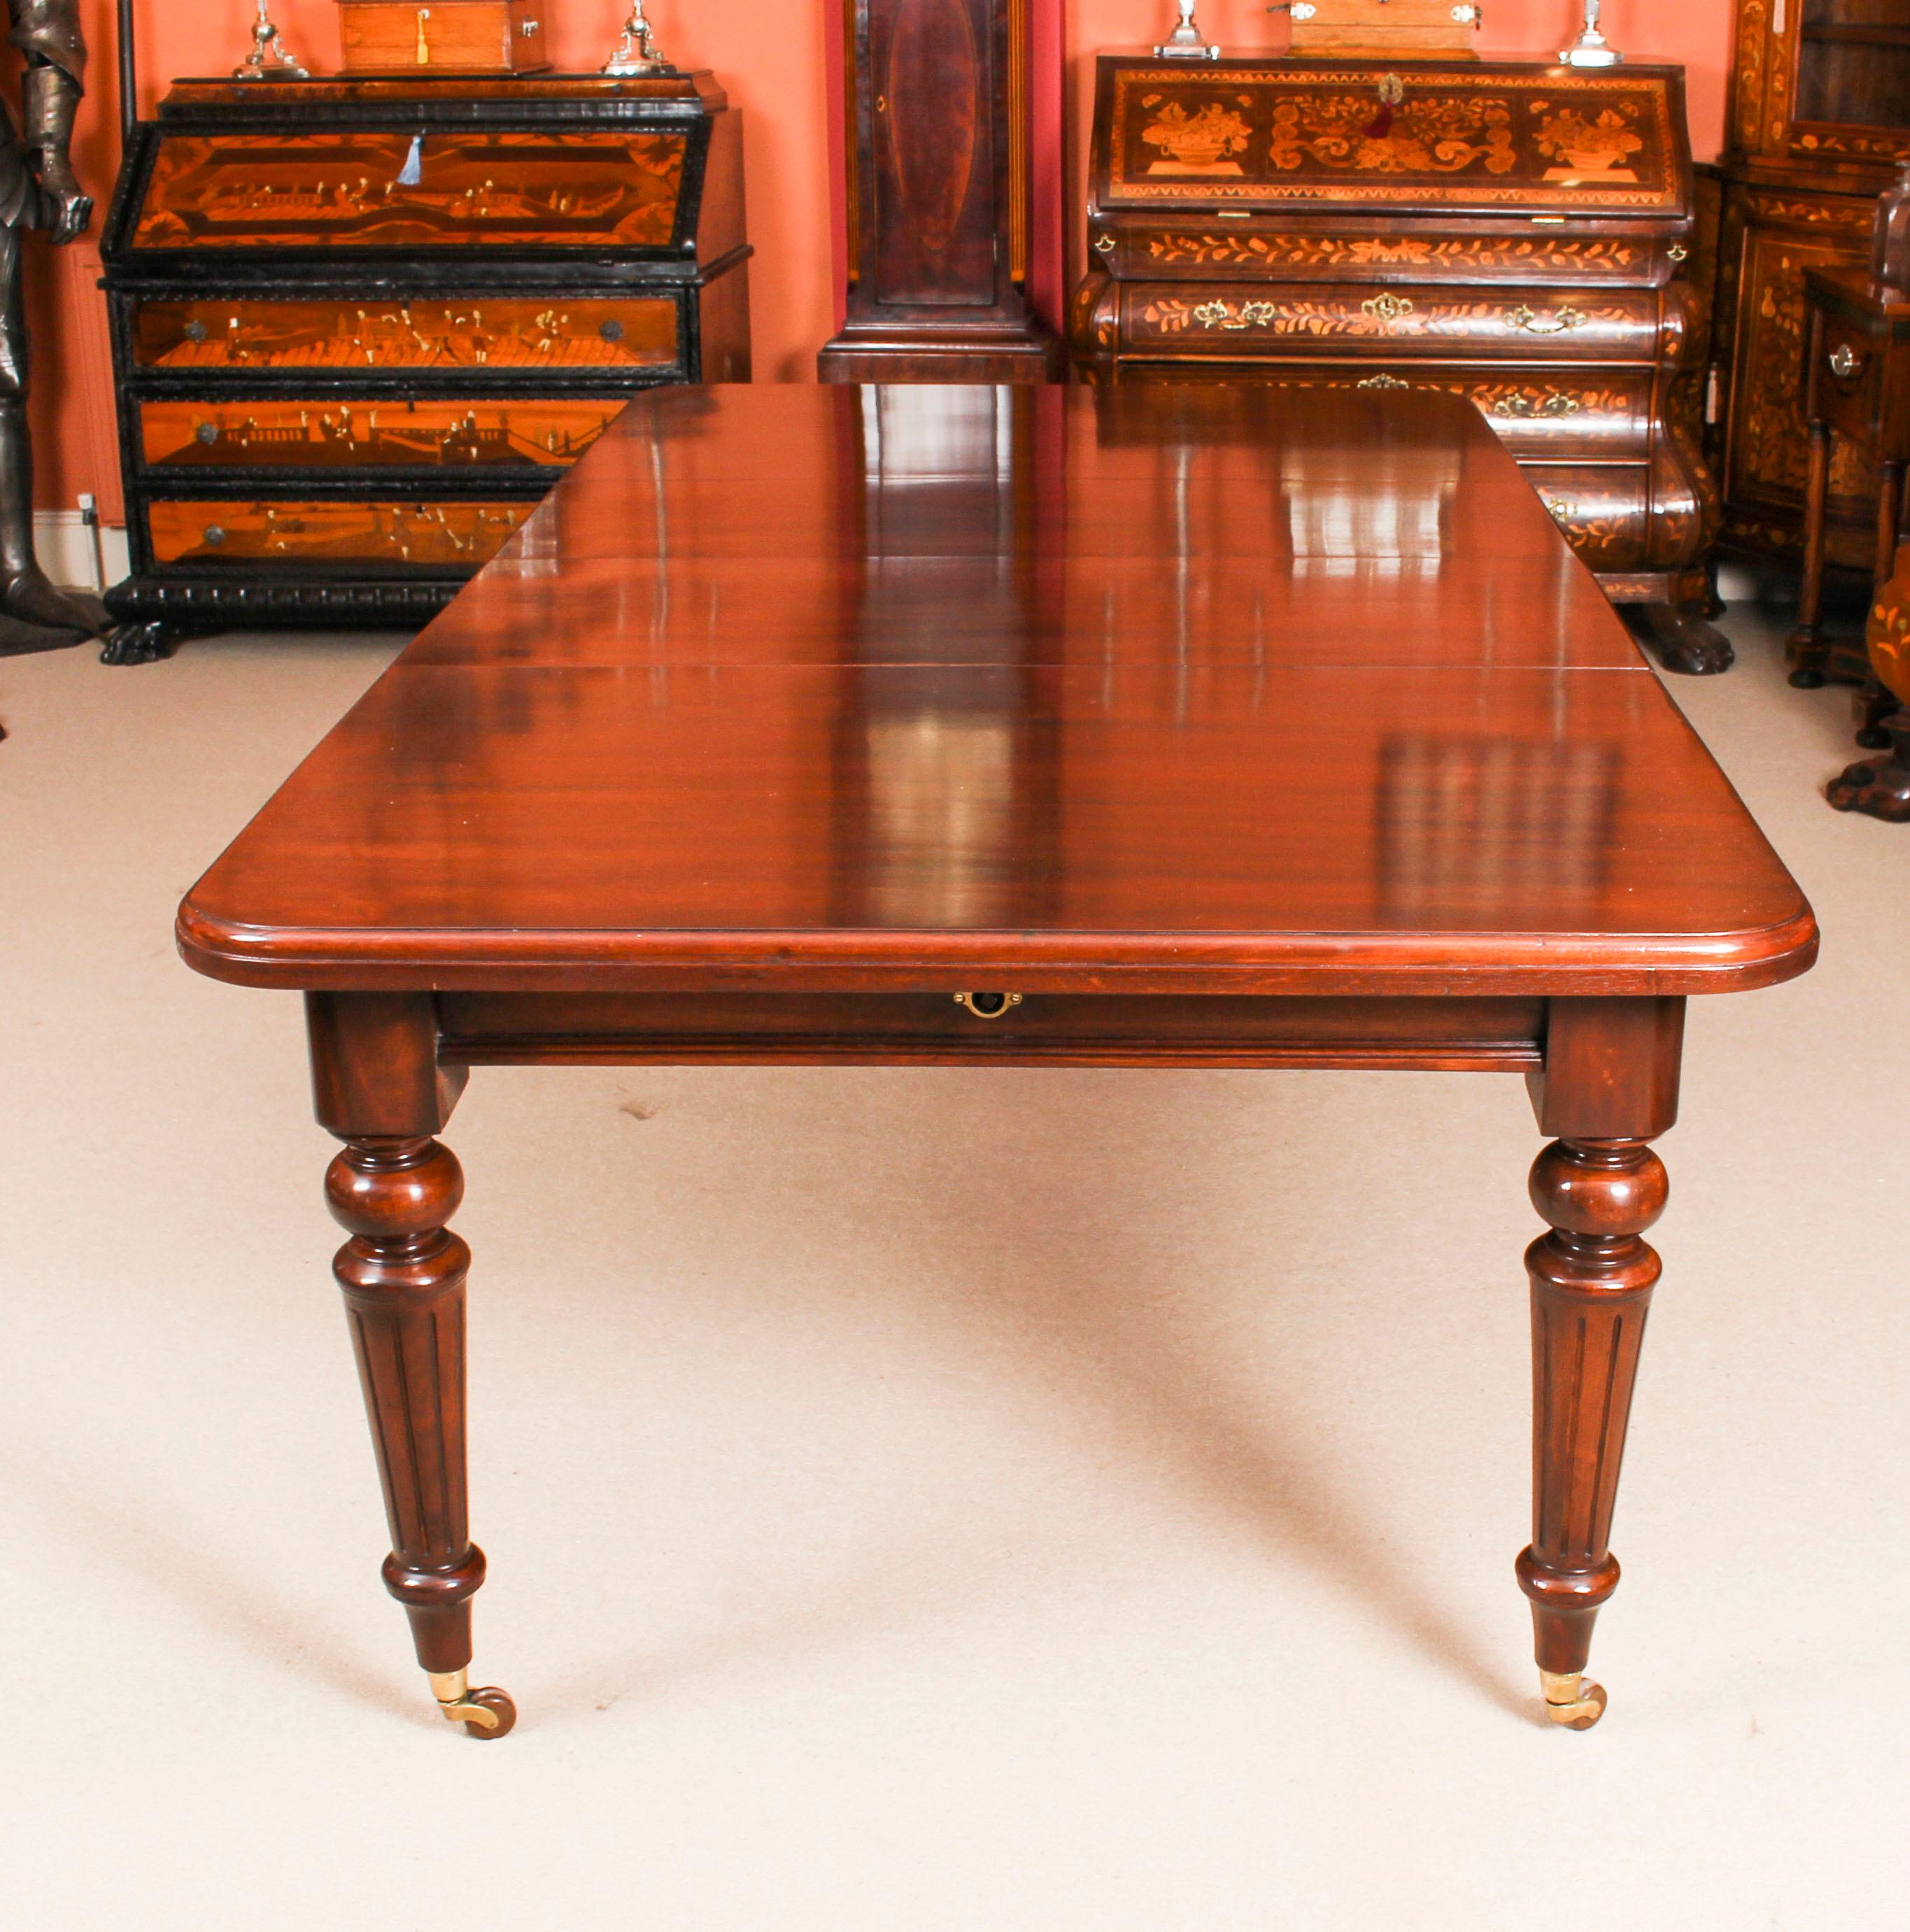 This is a magnificent antique Victorian solid mahogany wind out dining table which can seat ten diners in comfort and circa 1870 in date.
 
This beautiful table is in stunning mahogany and has two leaves of forty five cm each, which can be added